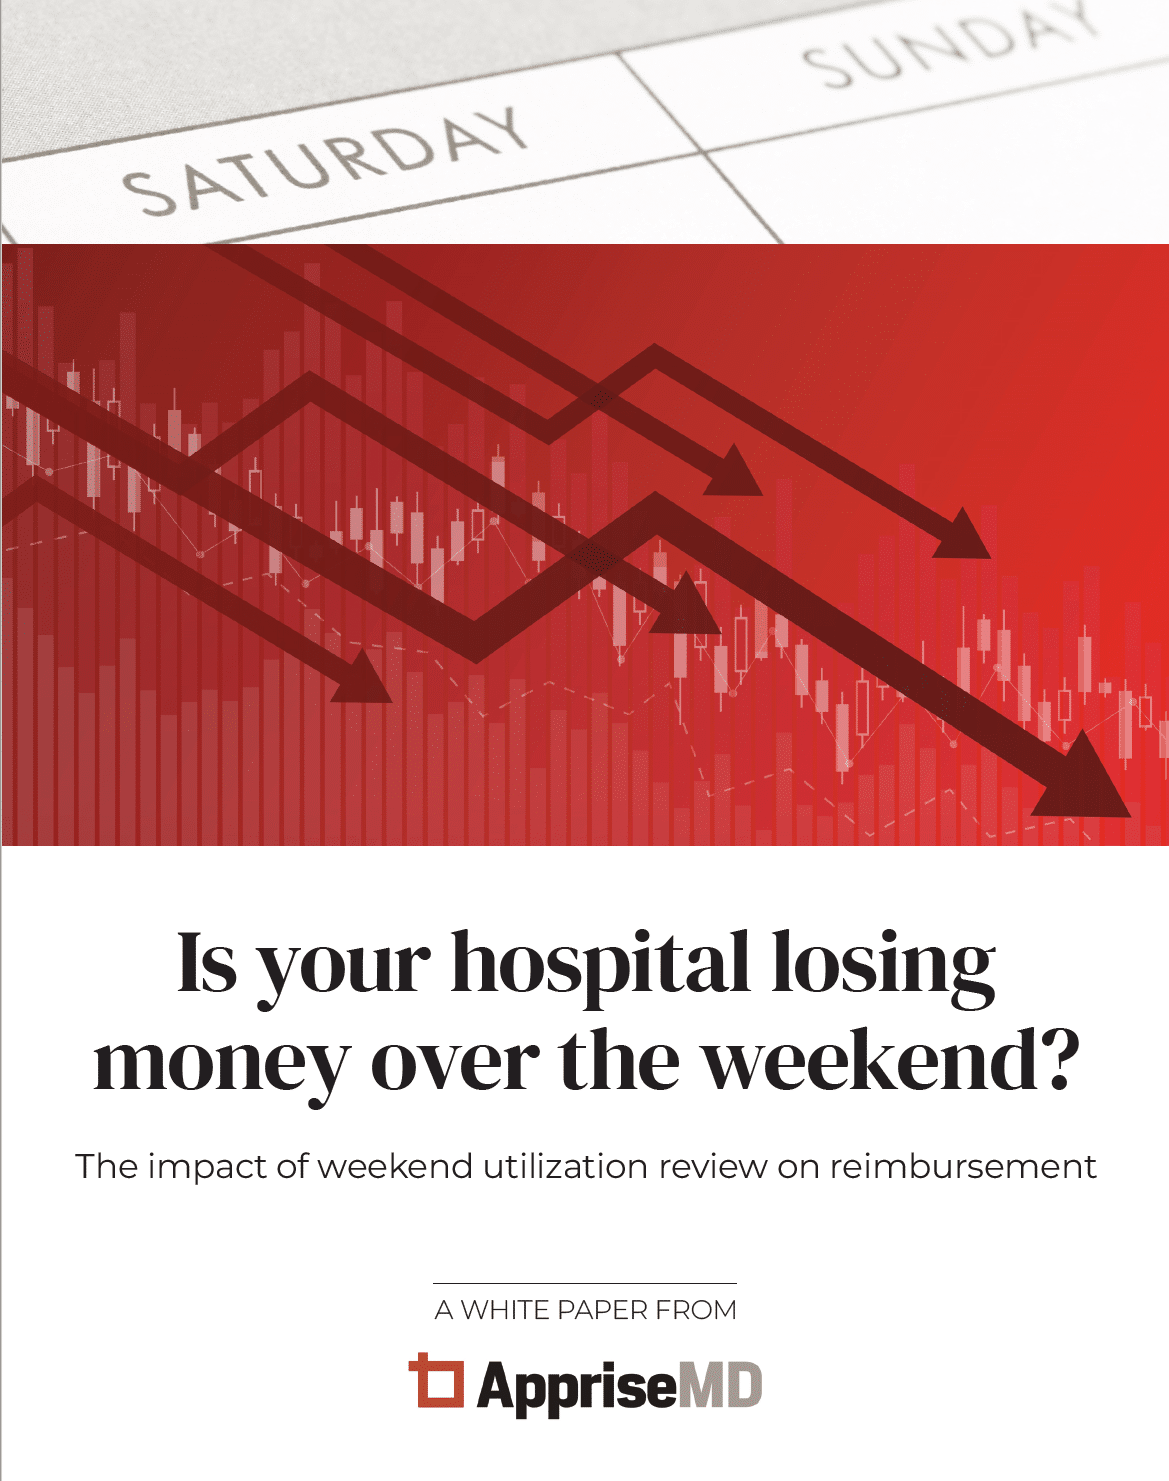 Is your hospital losing money over the weekend? The impact of weekend utilization review on reimbursement.